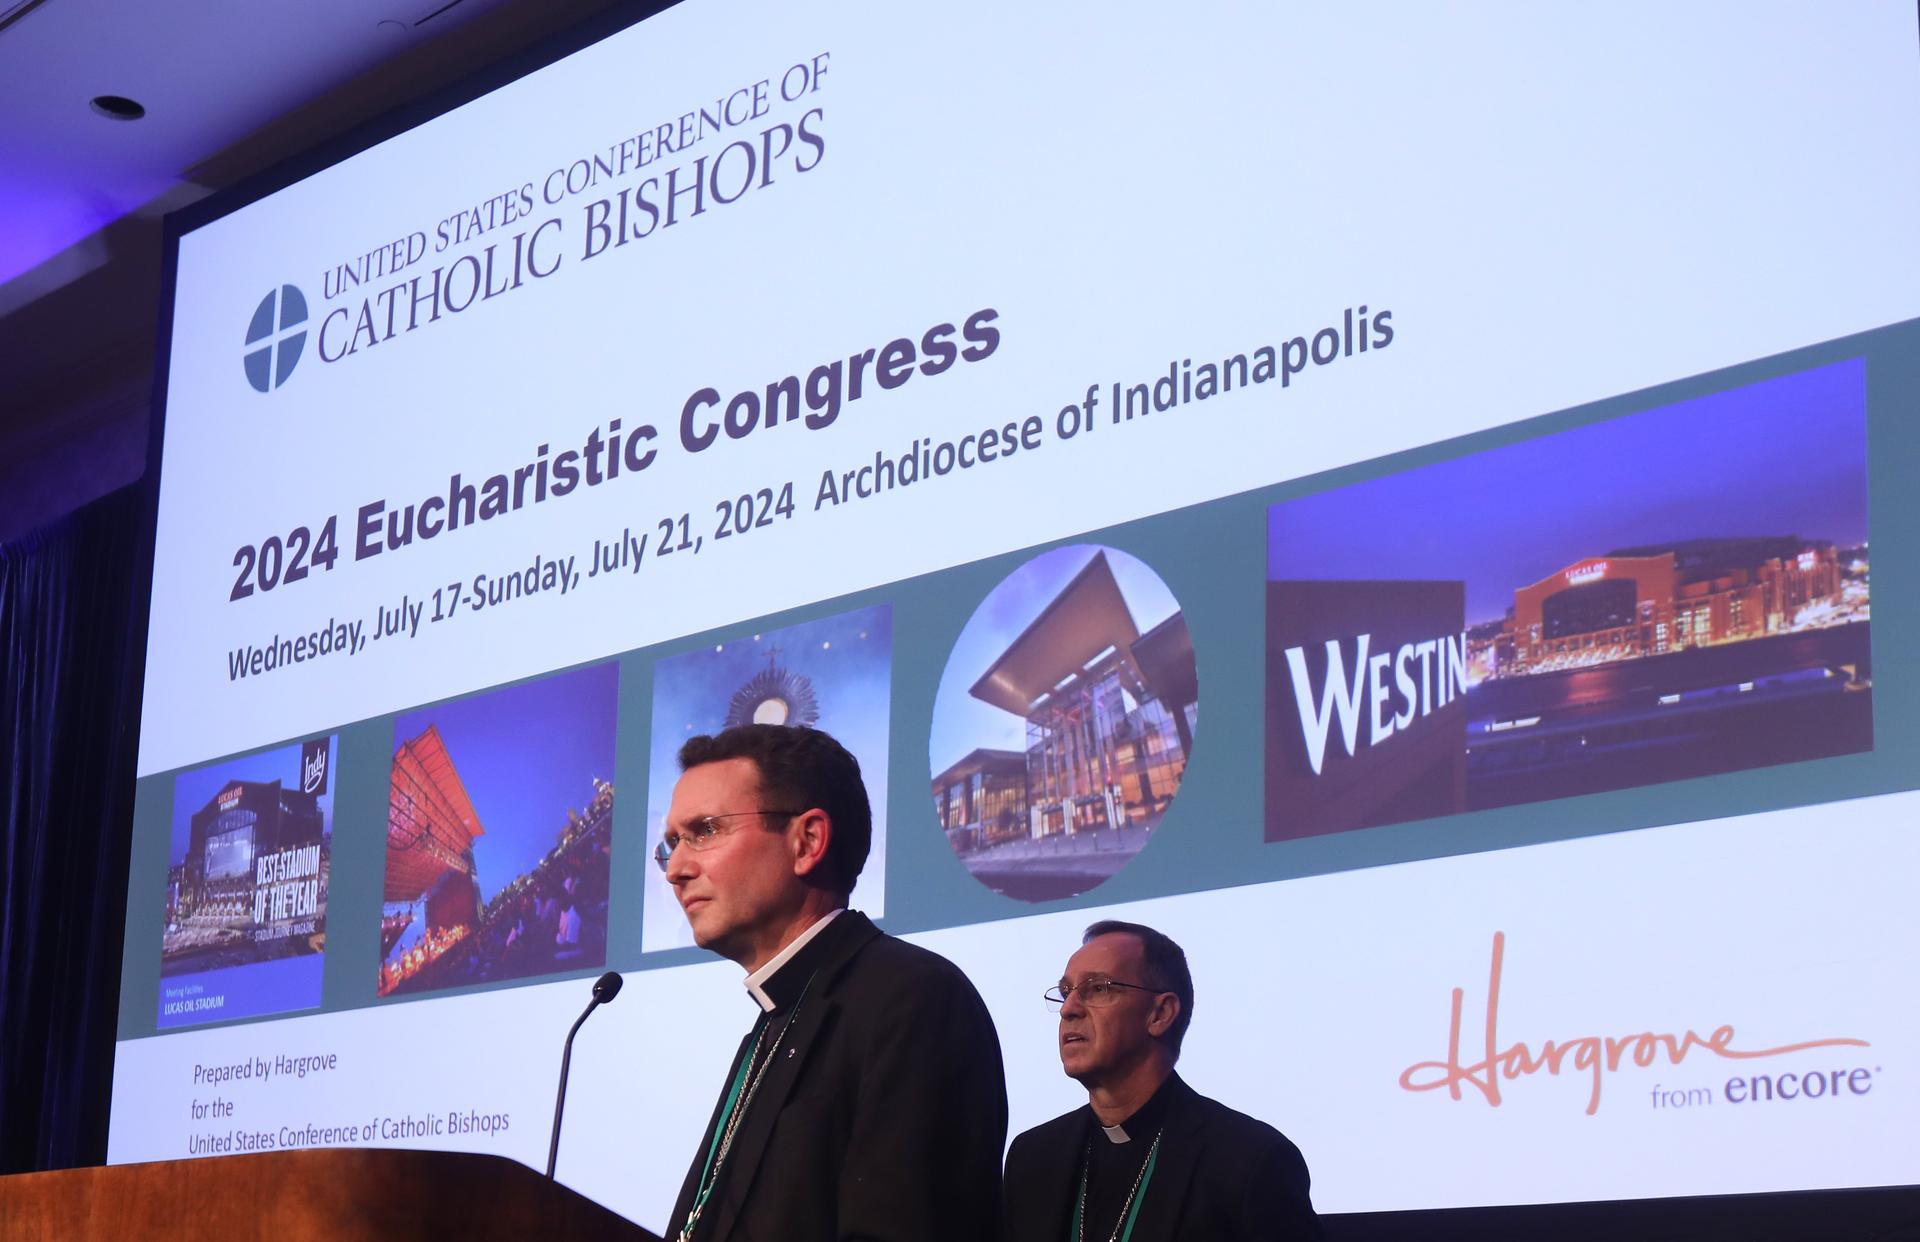 National Eucharistic Congress about ‘encounter with a person,’ official says